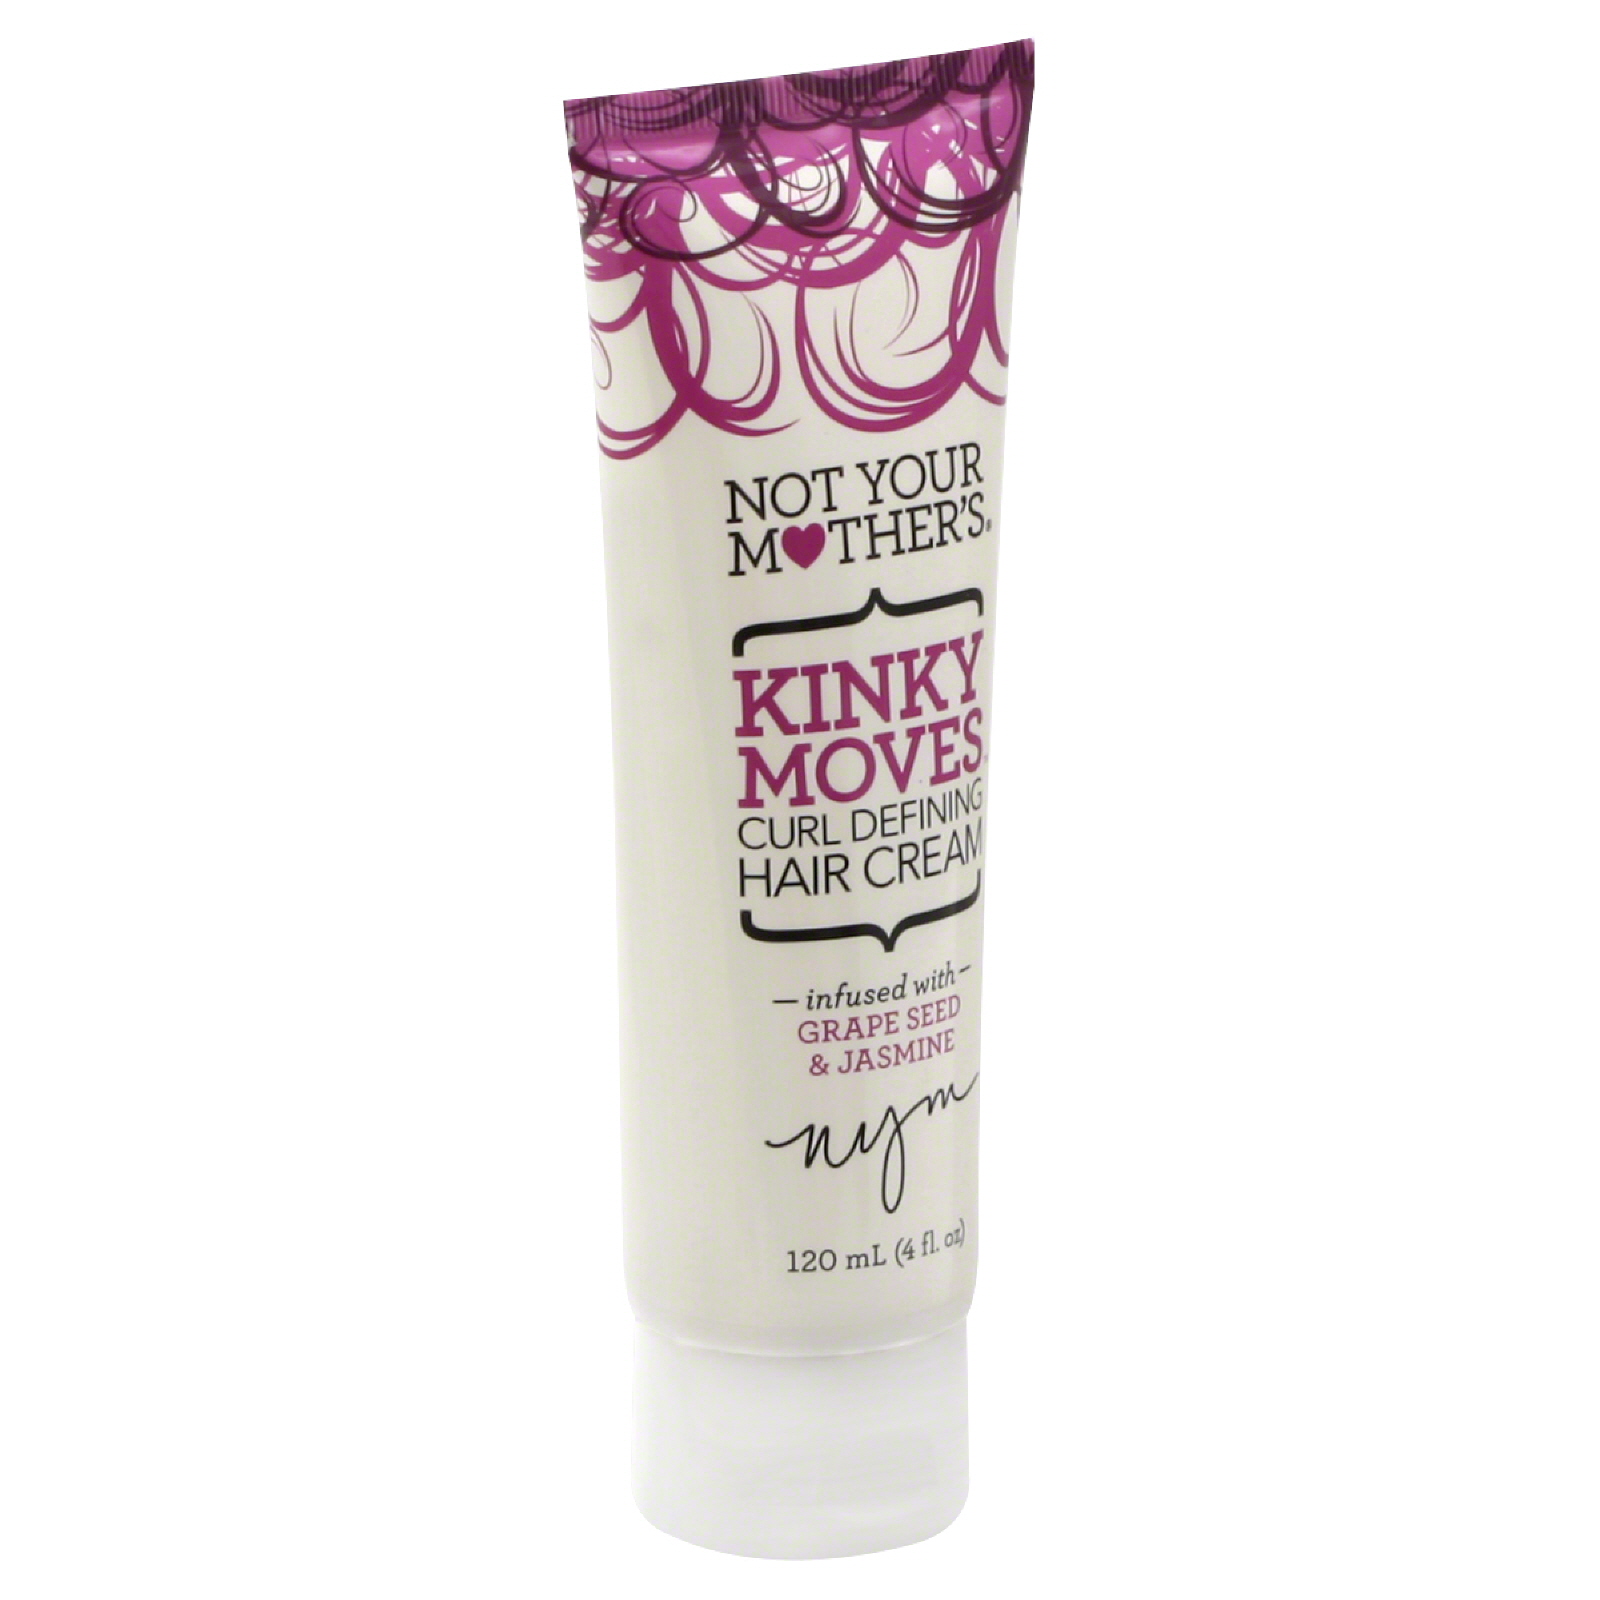 Not Your Mothers Hair Cream, Curl Defining, Kinky Moves, 4 fl oz (120 ml)